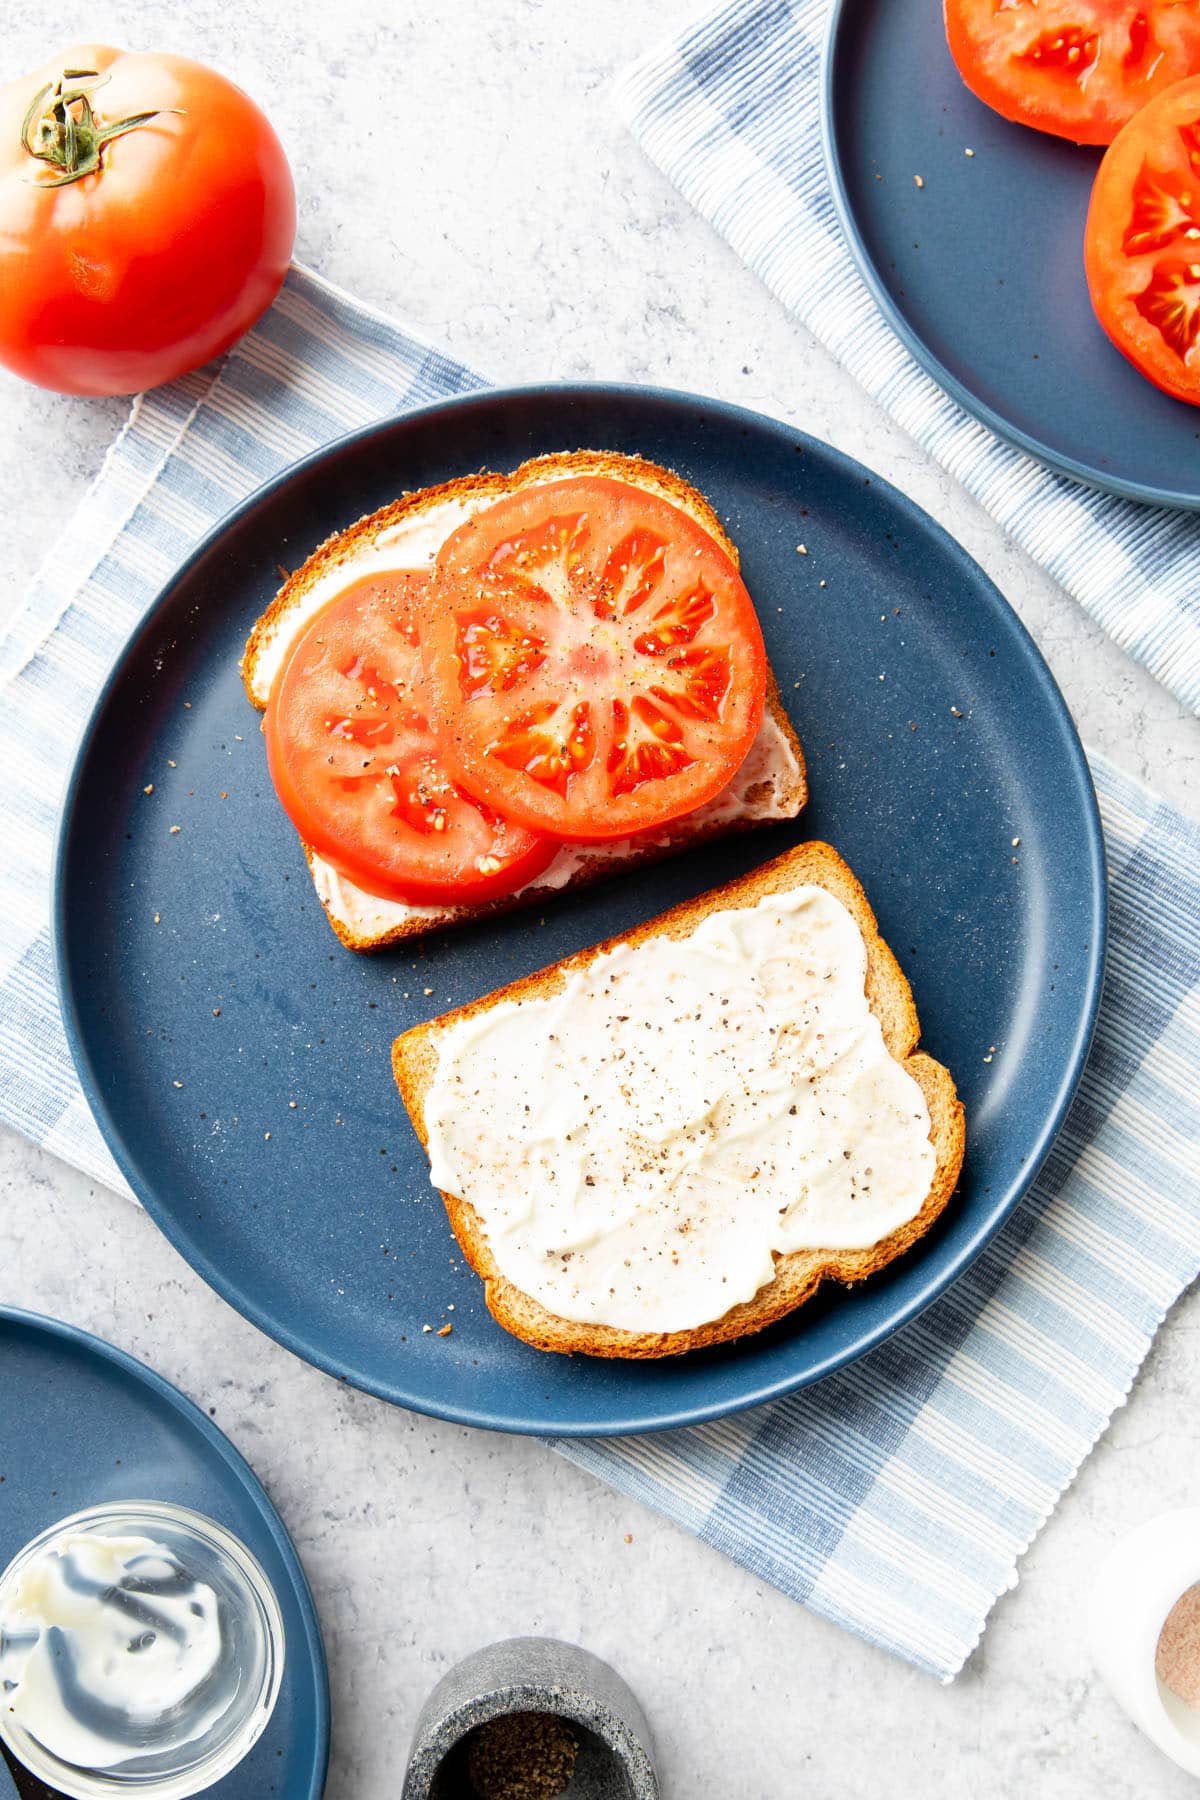 Tomato Sandwich served on a plate with salt